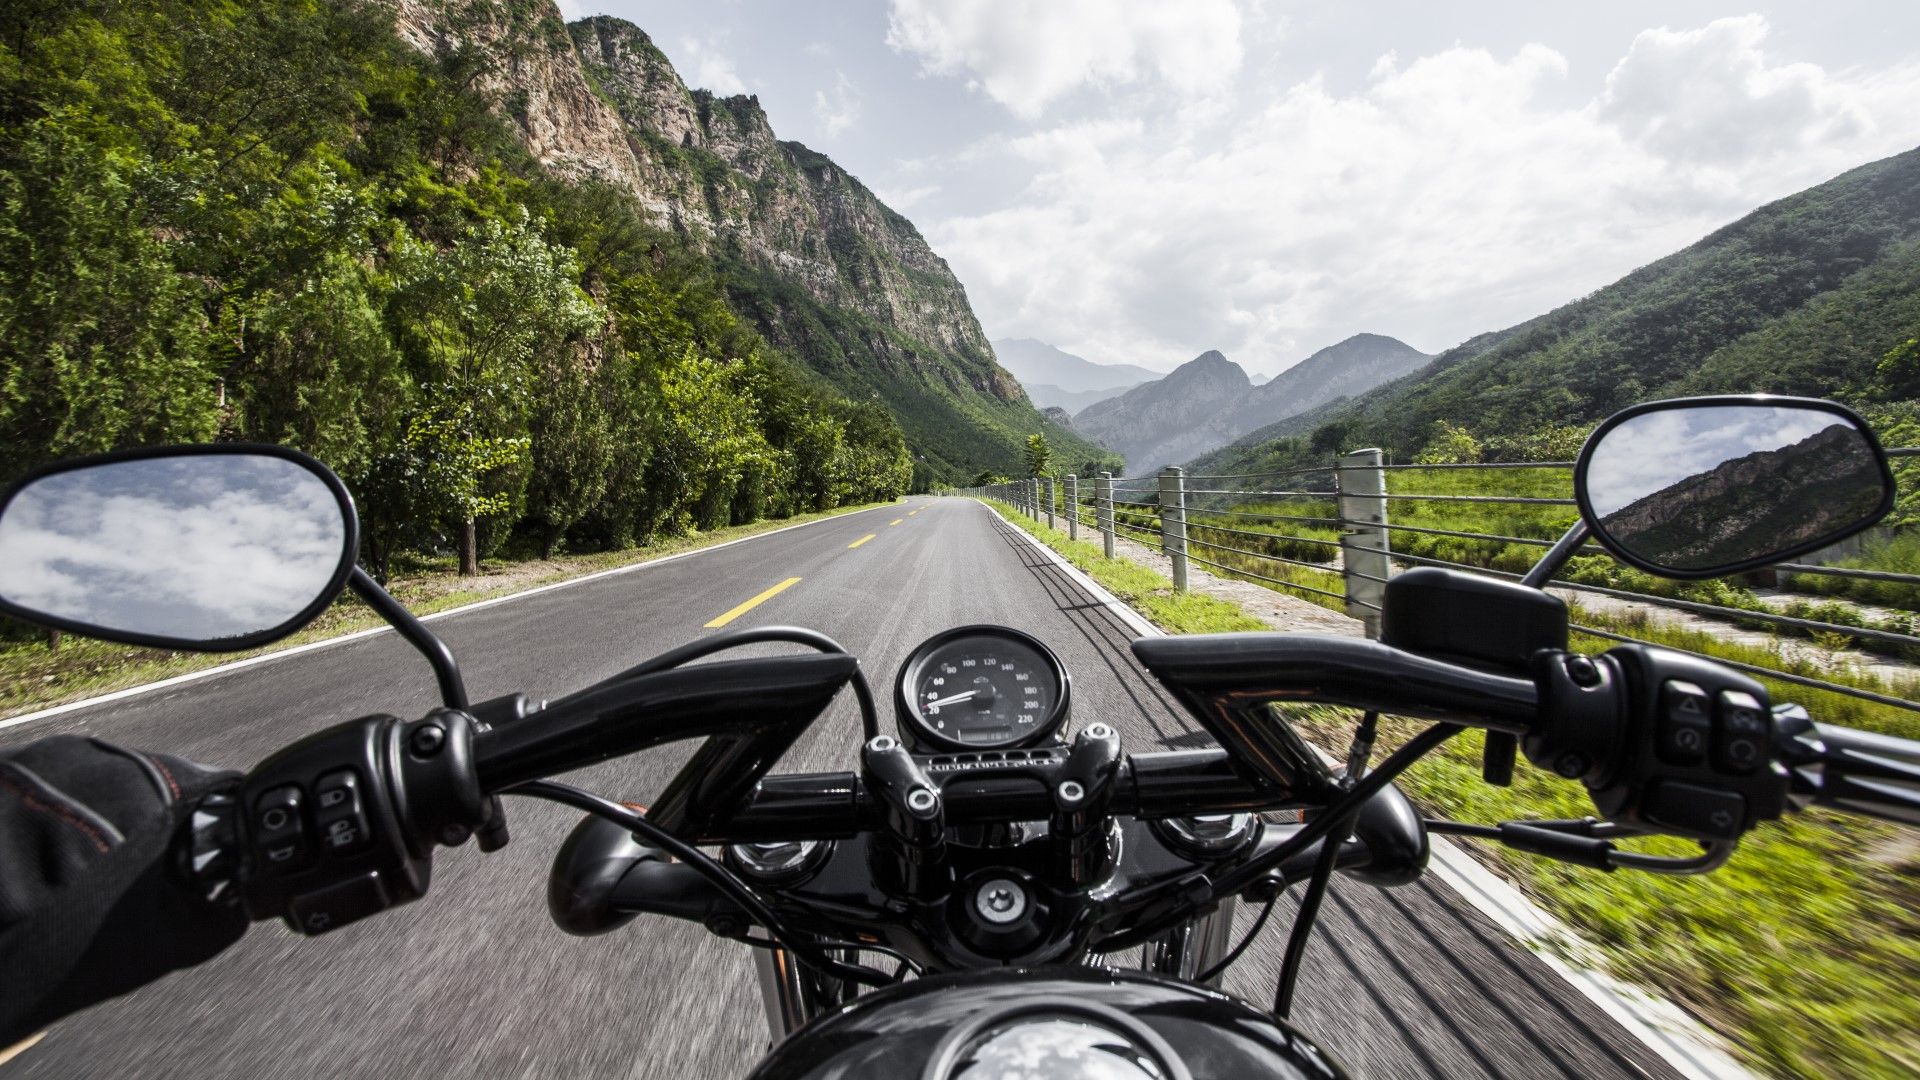 A motorcycle enthusiast's dream road POV view